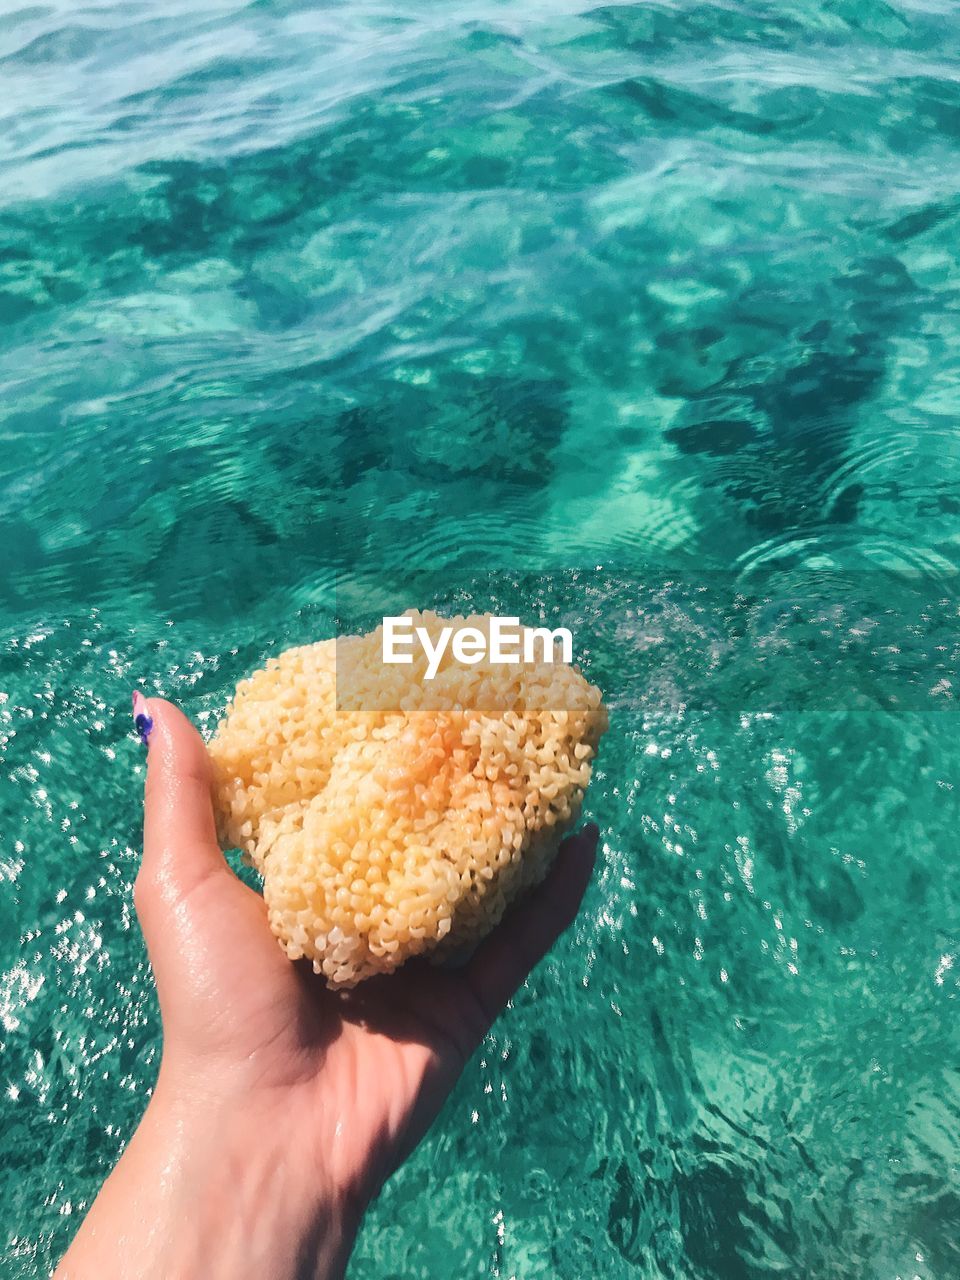 Cropped hand of woman holding coral against sea